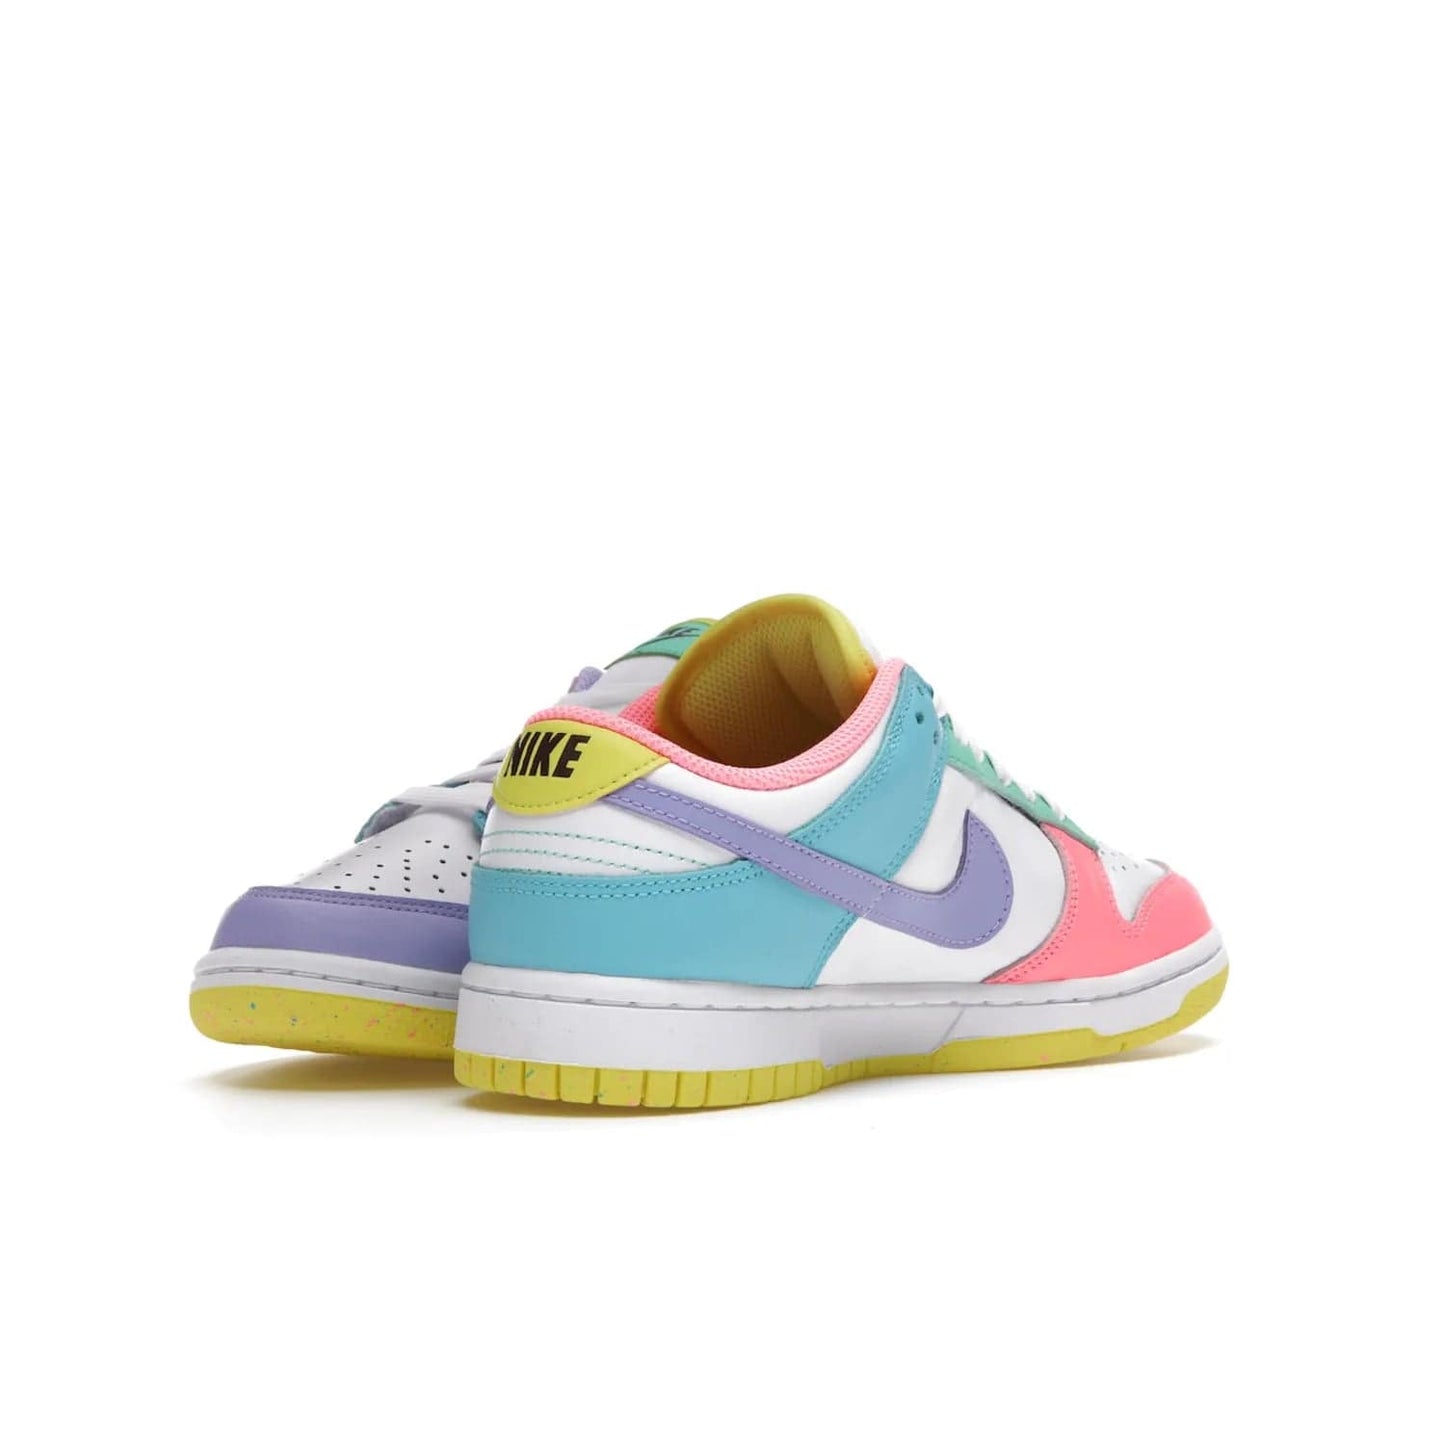 Nike Dunk Low SE Easter Candy (Women's) - Image 14 - Only at www.BallersClubKickz.com - UP
The Nike Dunk Low SE Easter Candy (Women's) brings a stylish touch to any outfit with its white leather upper, colorful accents, and multicolor speckle detailing. Shop now before they're gone.